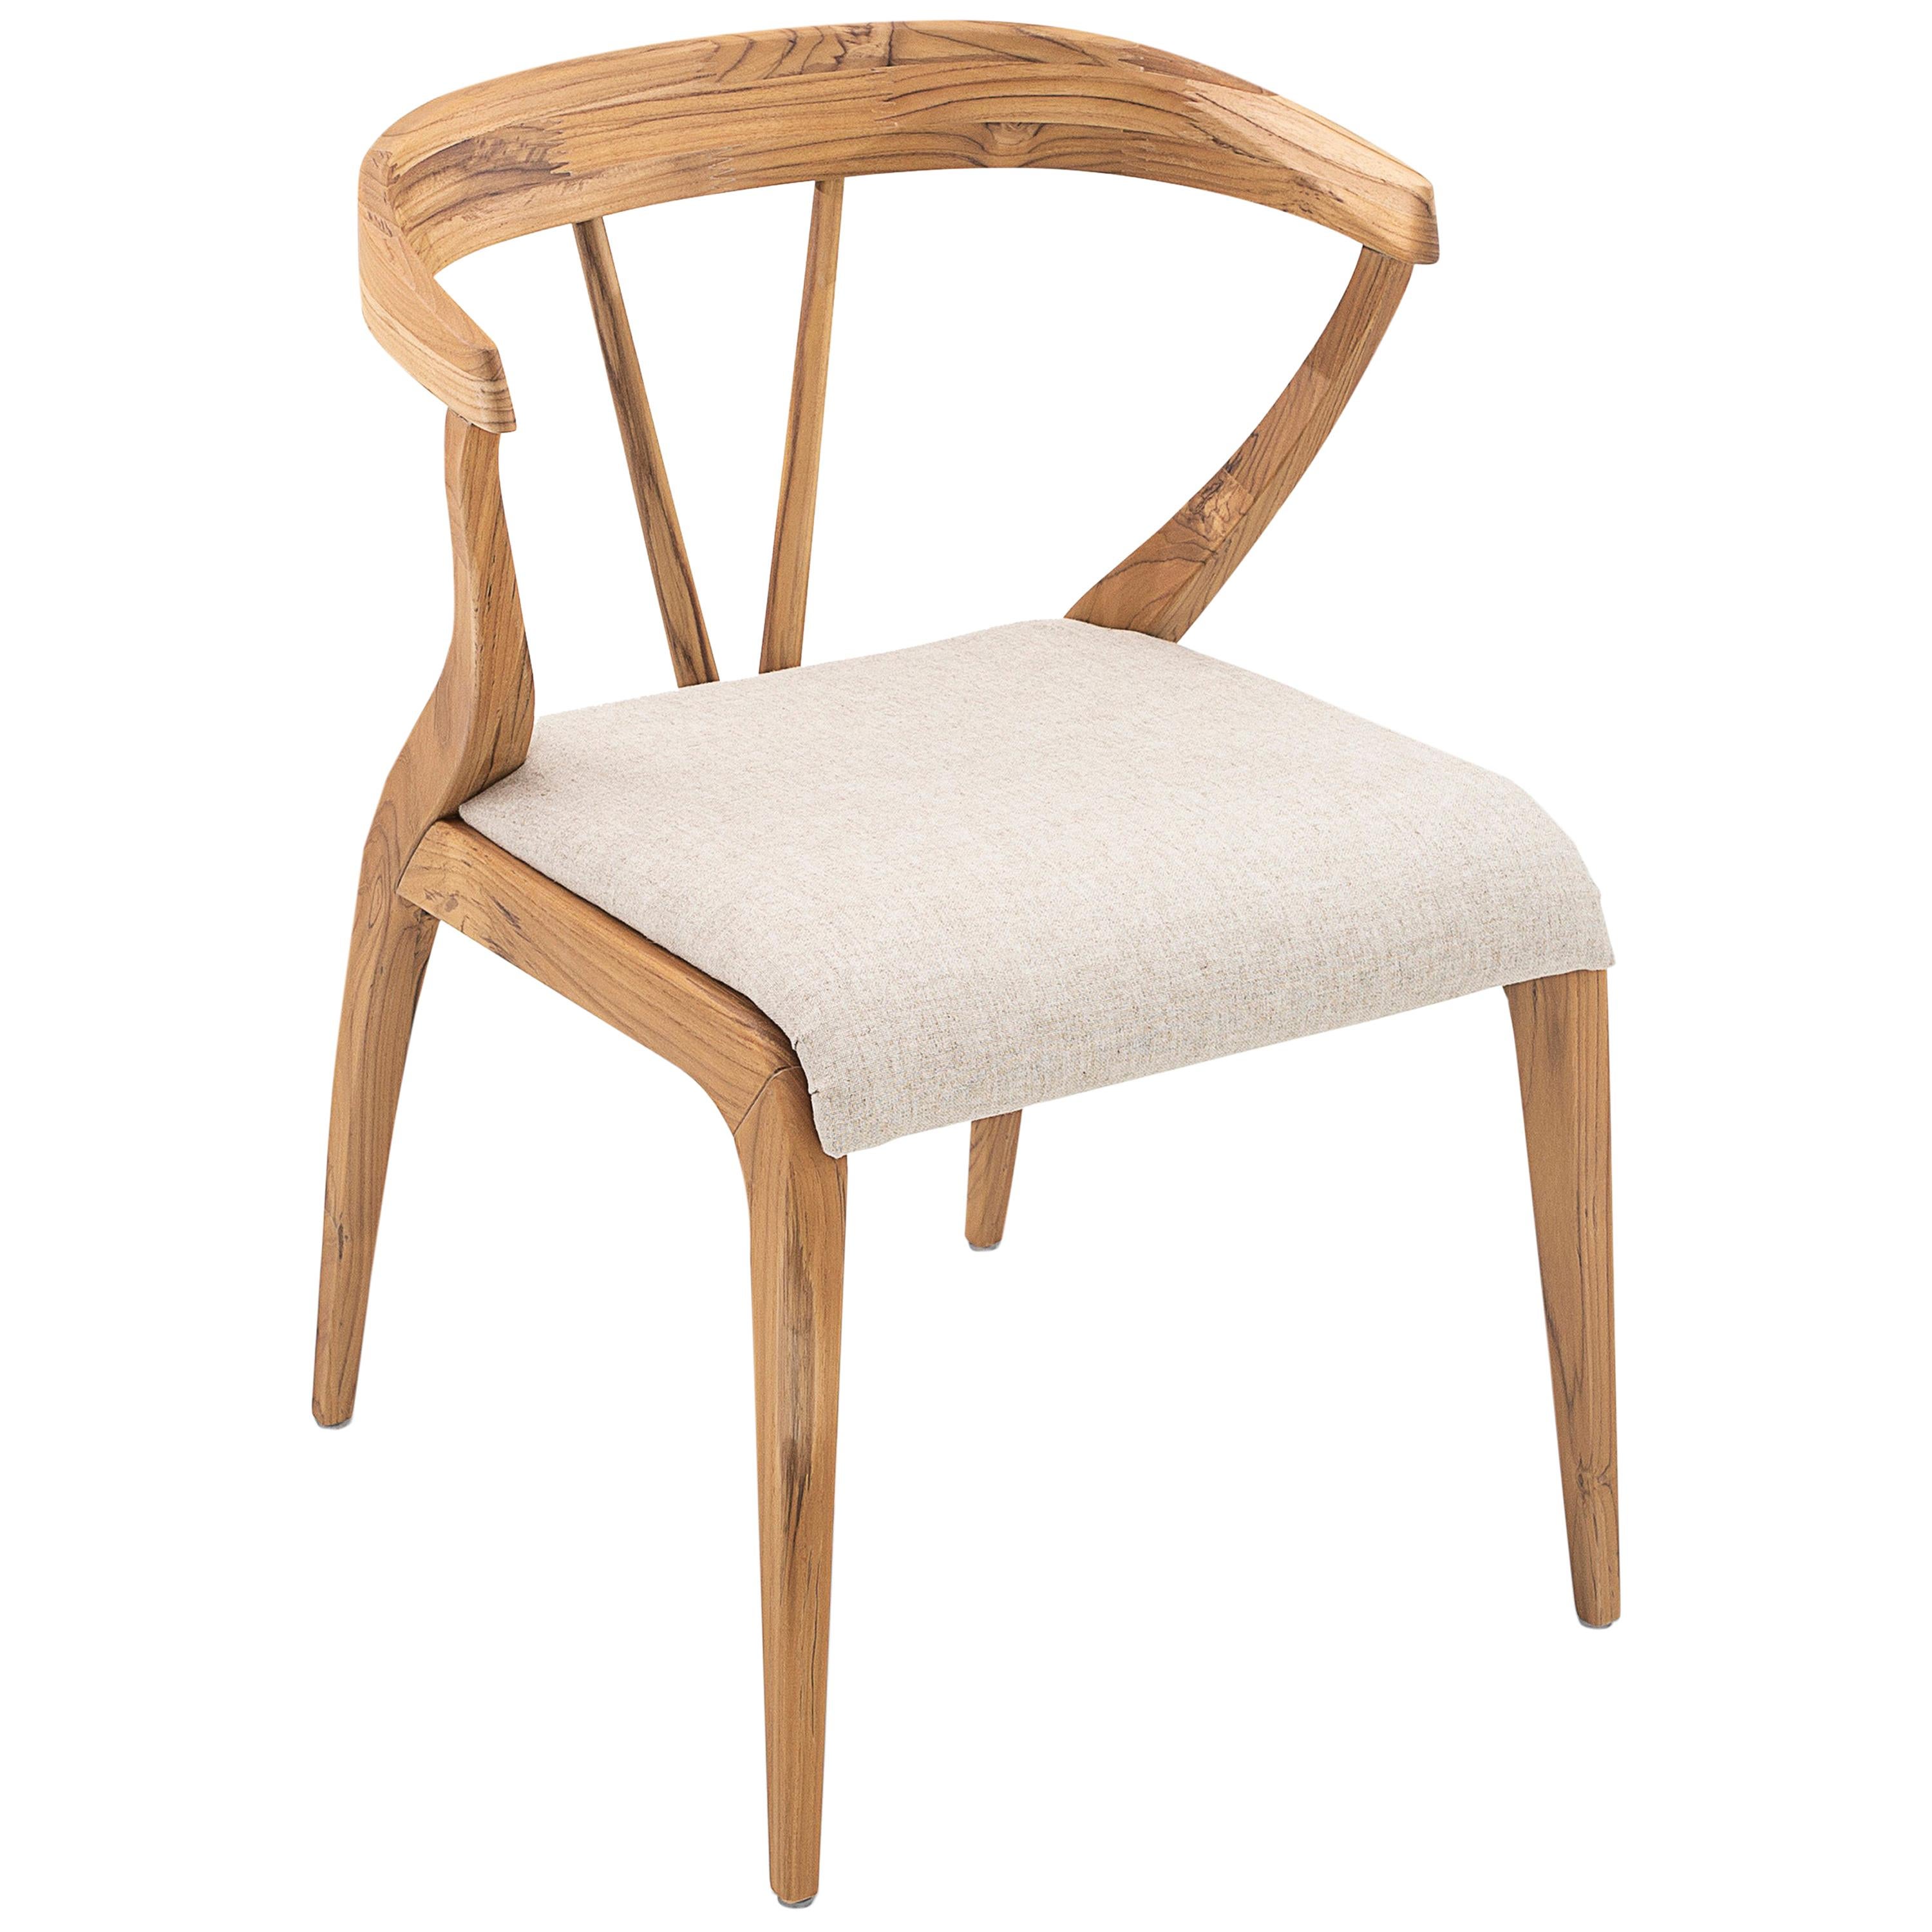 Our Uultis team has created the beautifully shaped Mat dining chair to decorate your beautiful dining table with an upholstered seat in ivory fabric, a teak wood finish for the frame with an open back. This chair has a beautiful simple but elegant